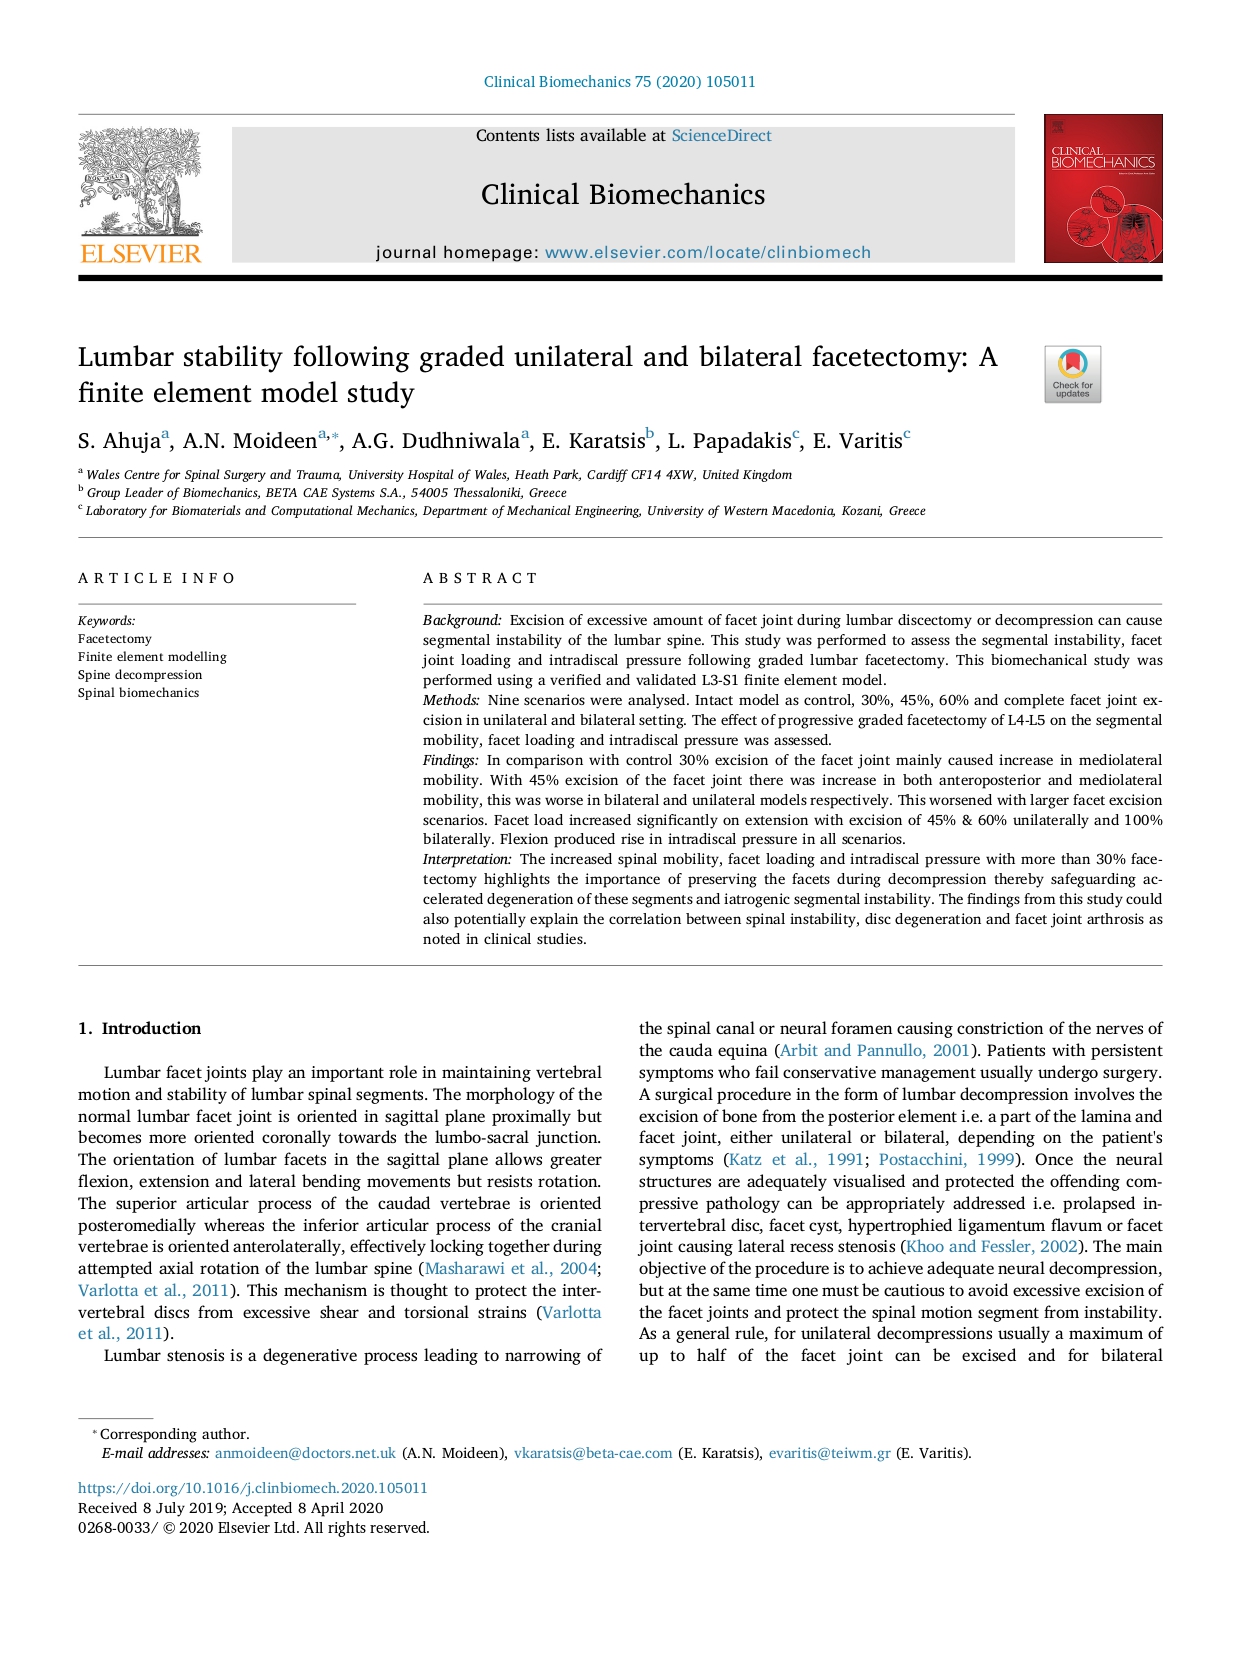 Lumbar stability following graded unilateral and bilateral facetectomy_ A finite element model study_page-0001.jpg